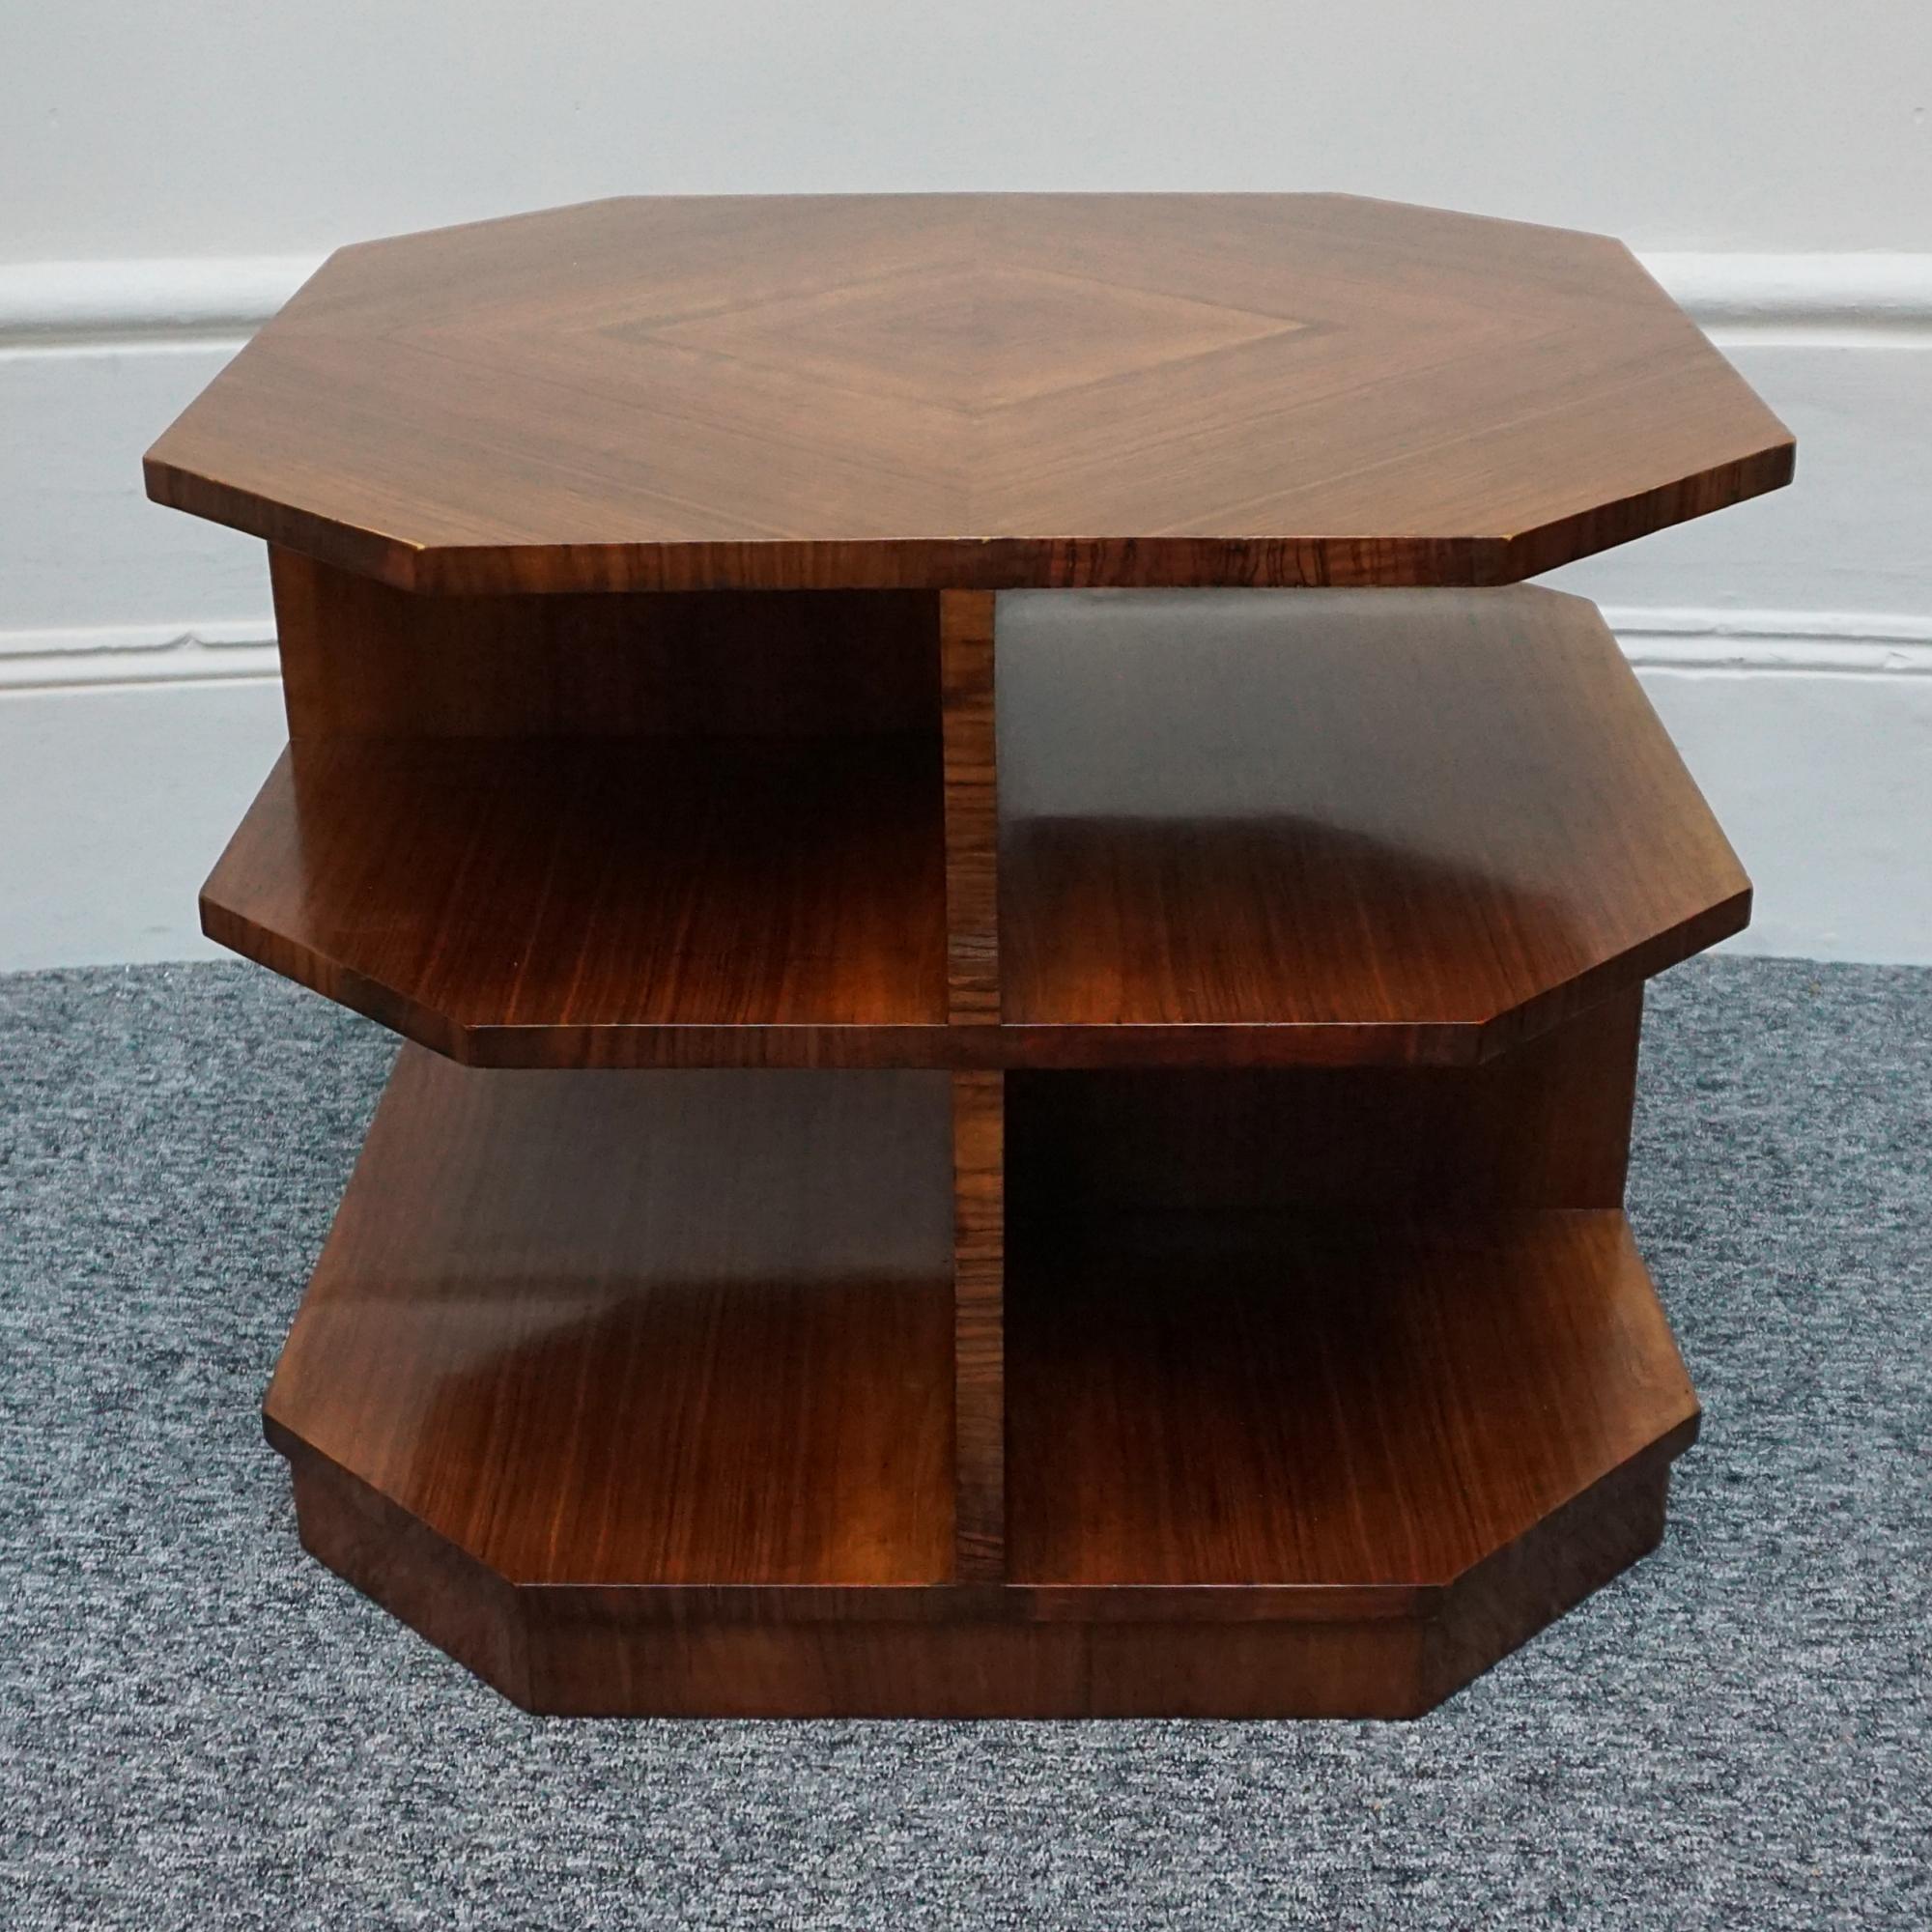 An Art Deco octagonal three-tier library table. Cross banded figured walnut veneer throughout with dividing sections to each tier. 

Dimensions: H 51.5cm W 63cm D 63cm 

Origin: English

Date: Circa 1930

Item Number: 2611232

All of our furniture